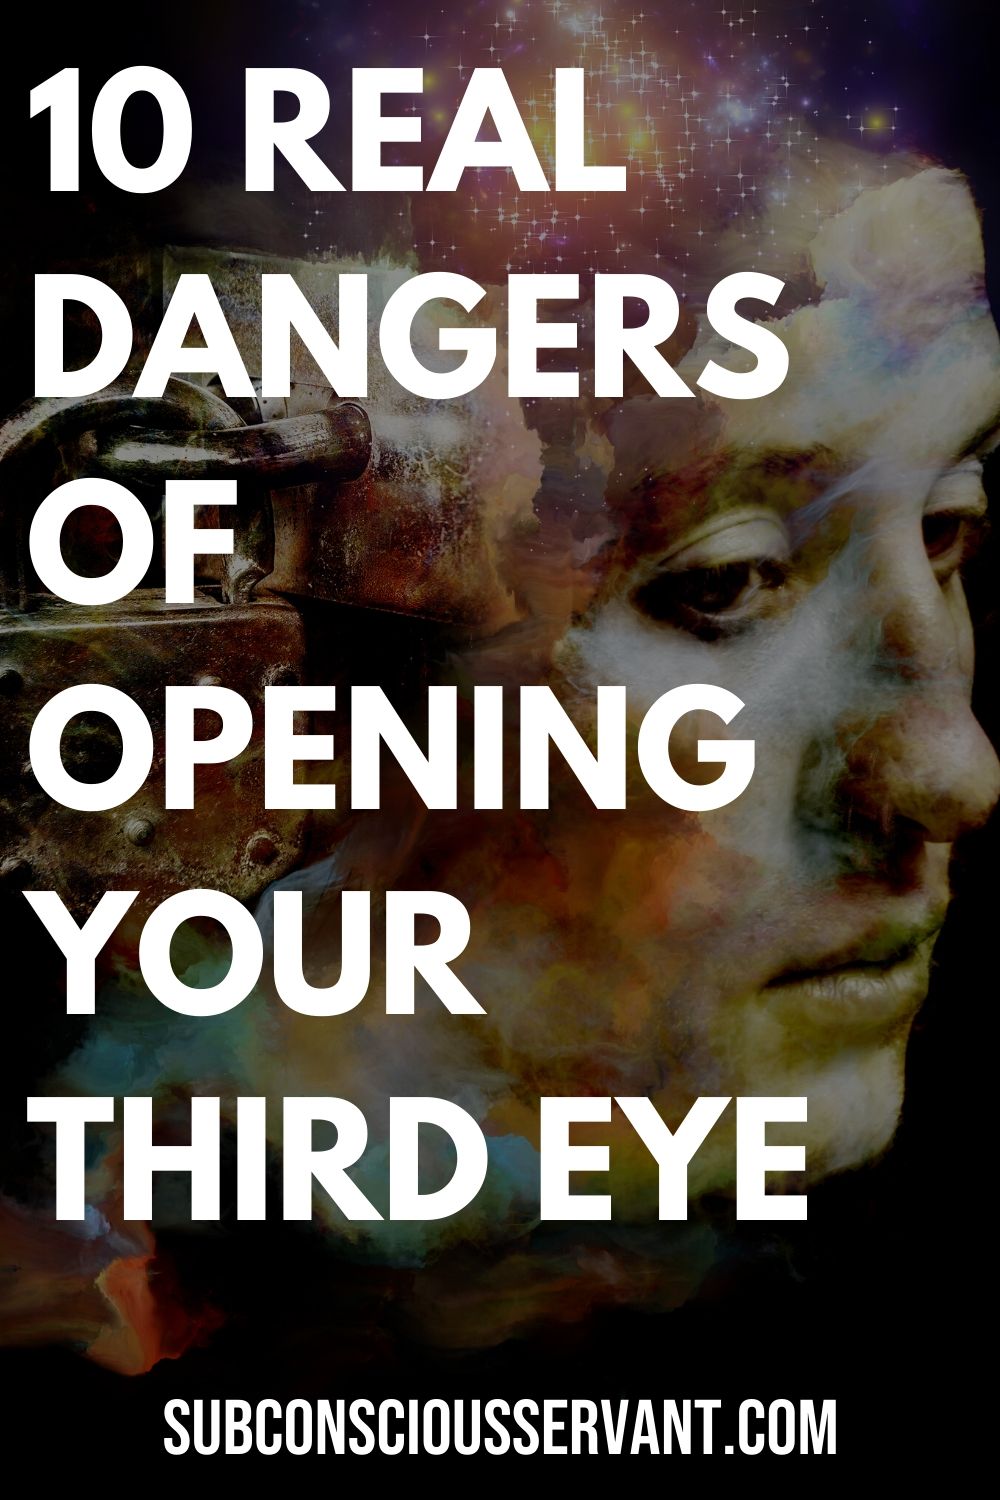 10 Real Dangers of Opening your Third Eye